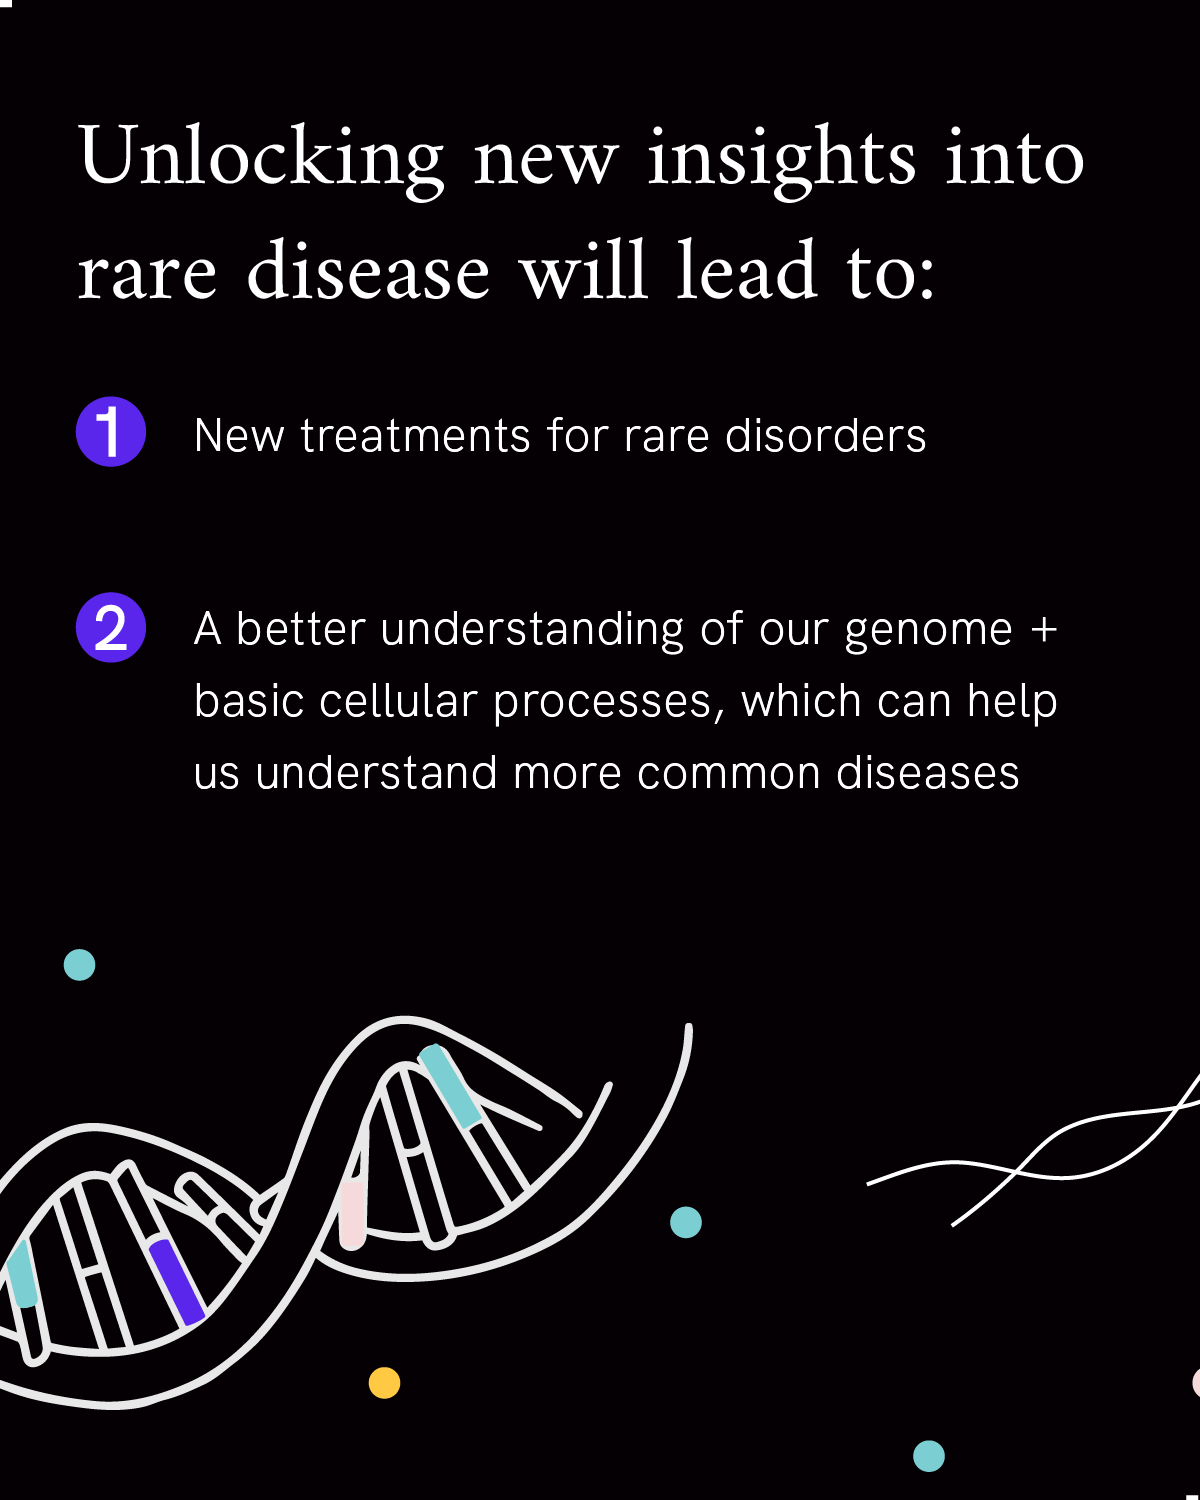 Infographic reads “Unlocking new insights into rare disease will lead to: 1. New treatments for rare disorders 2. A better understanding of our genome + basic cellular processes, which can help us understand more common diseases.” A white illustrated outline of a strand of DNA accompanies the text.